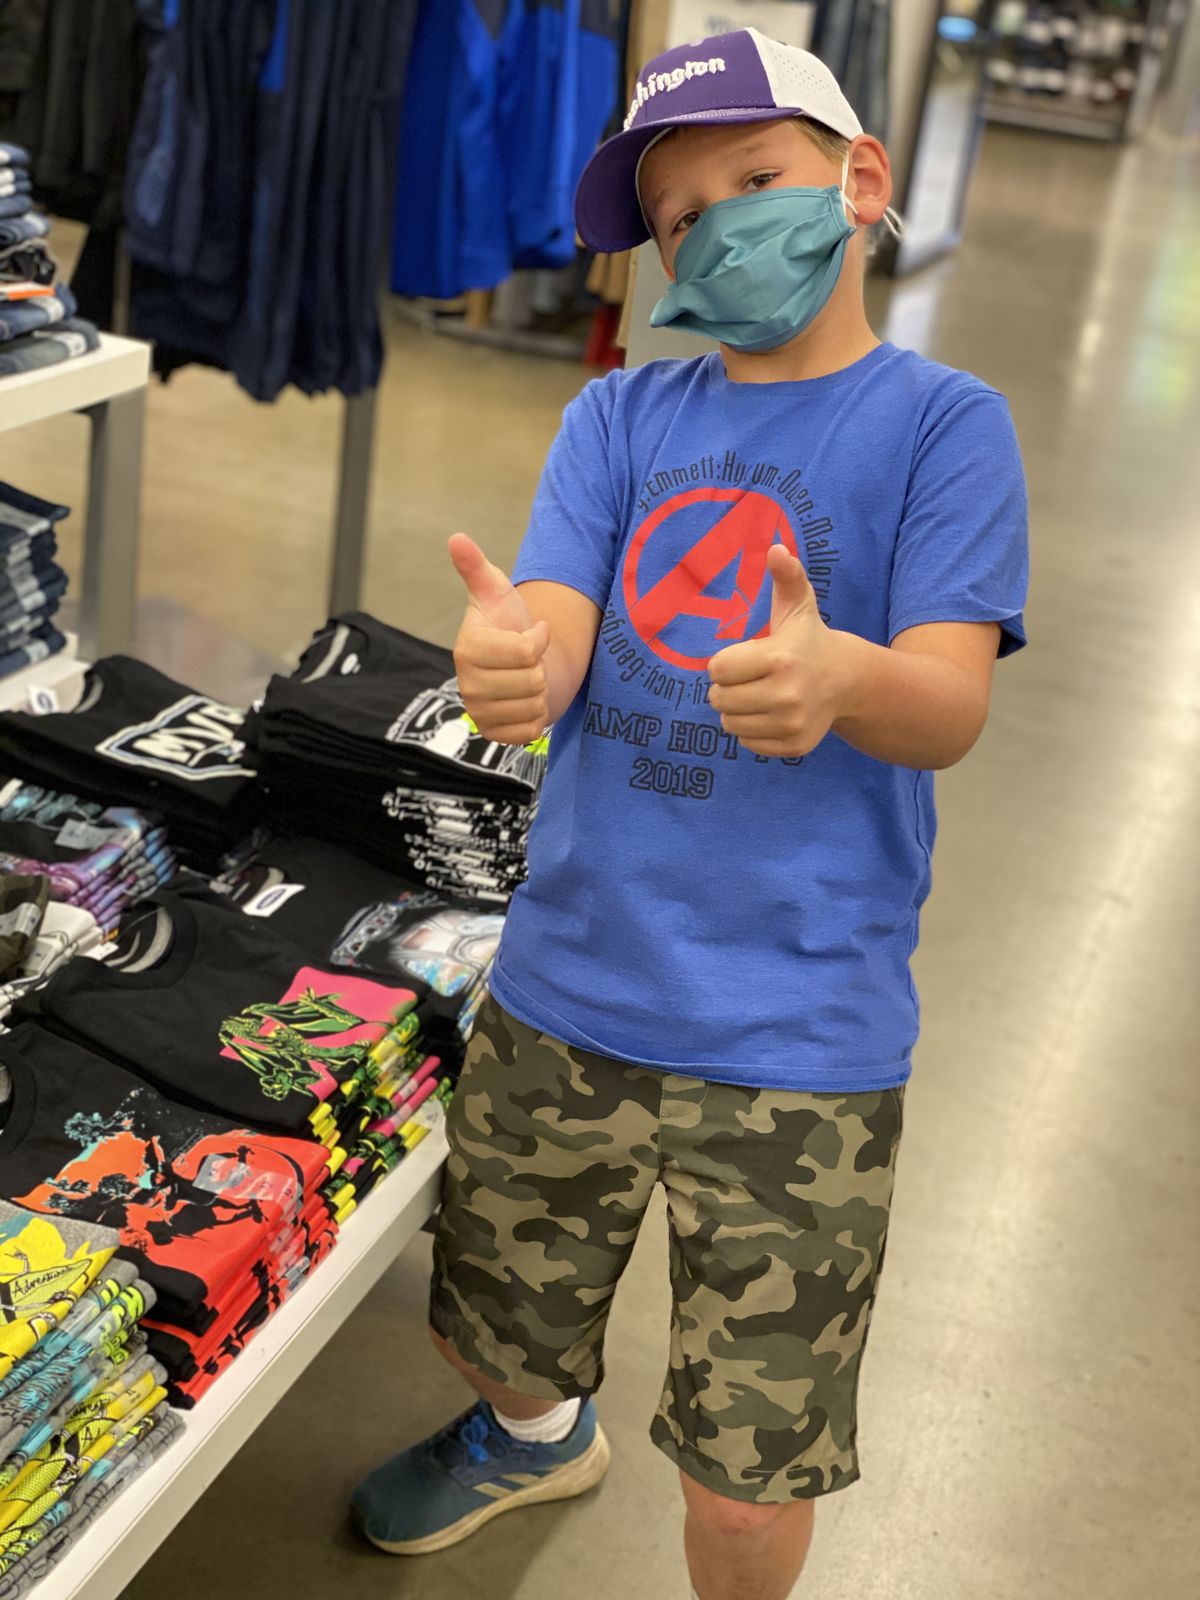 Henry Ditto gives a thumbs-up during his back-to-school shopping trip last week.  (Julia Ditto/For The Spokesman-Review)